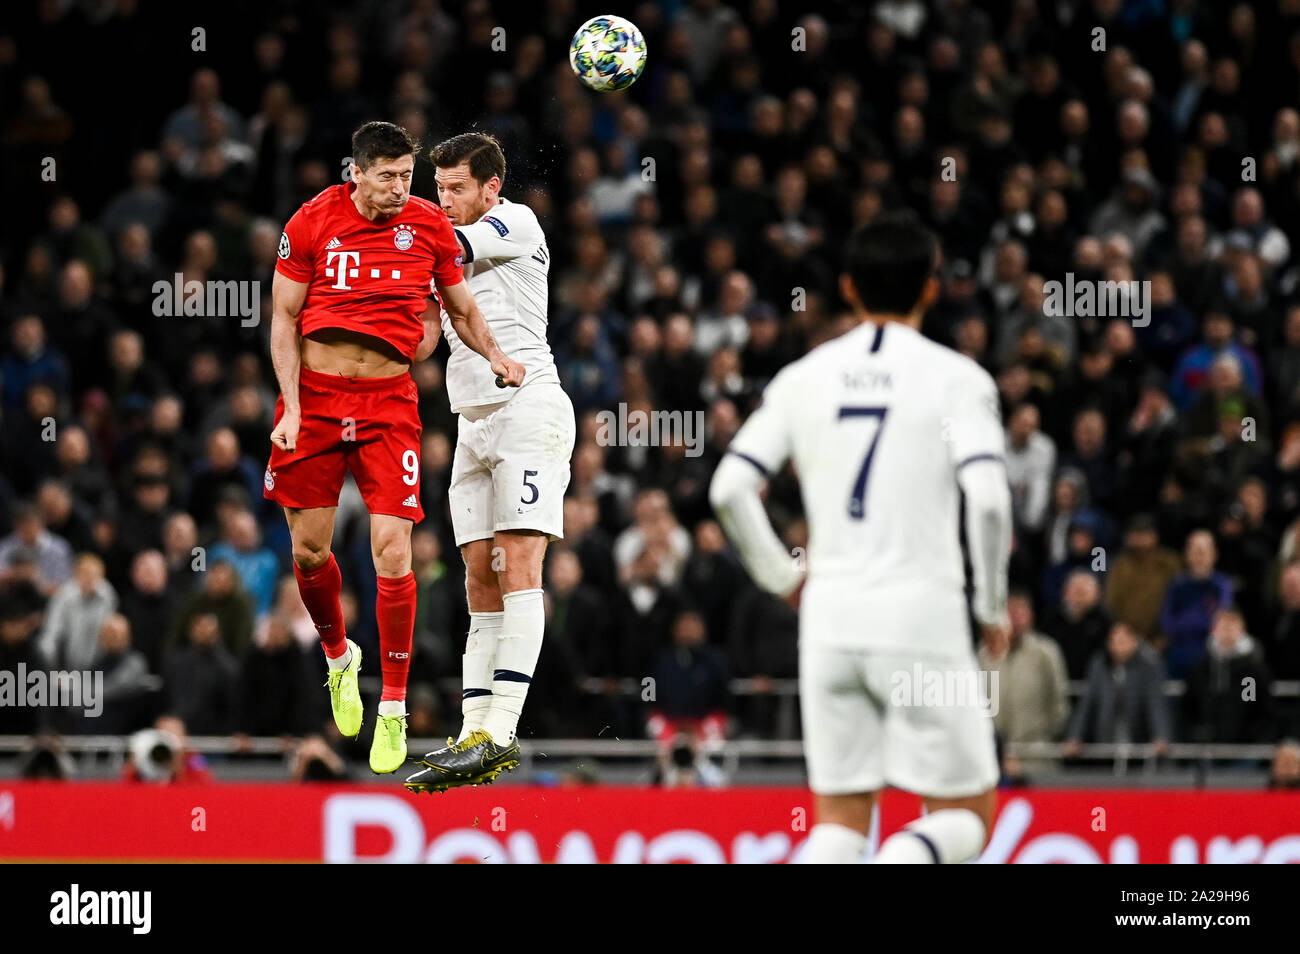 Robert Lewandowski from Bayern Munich (L) and Jan Vertonghen from Tottenham Hotspur (R) are seen in action during the UEFA Champions League (Group B) match between Tottenham Hotspur and Bayern Munich.(Final score; Tottenham Hotspur 2:7 Bayern Munich) Stock Photo